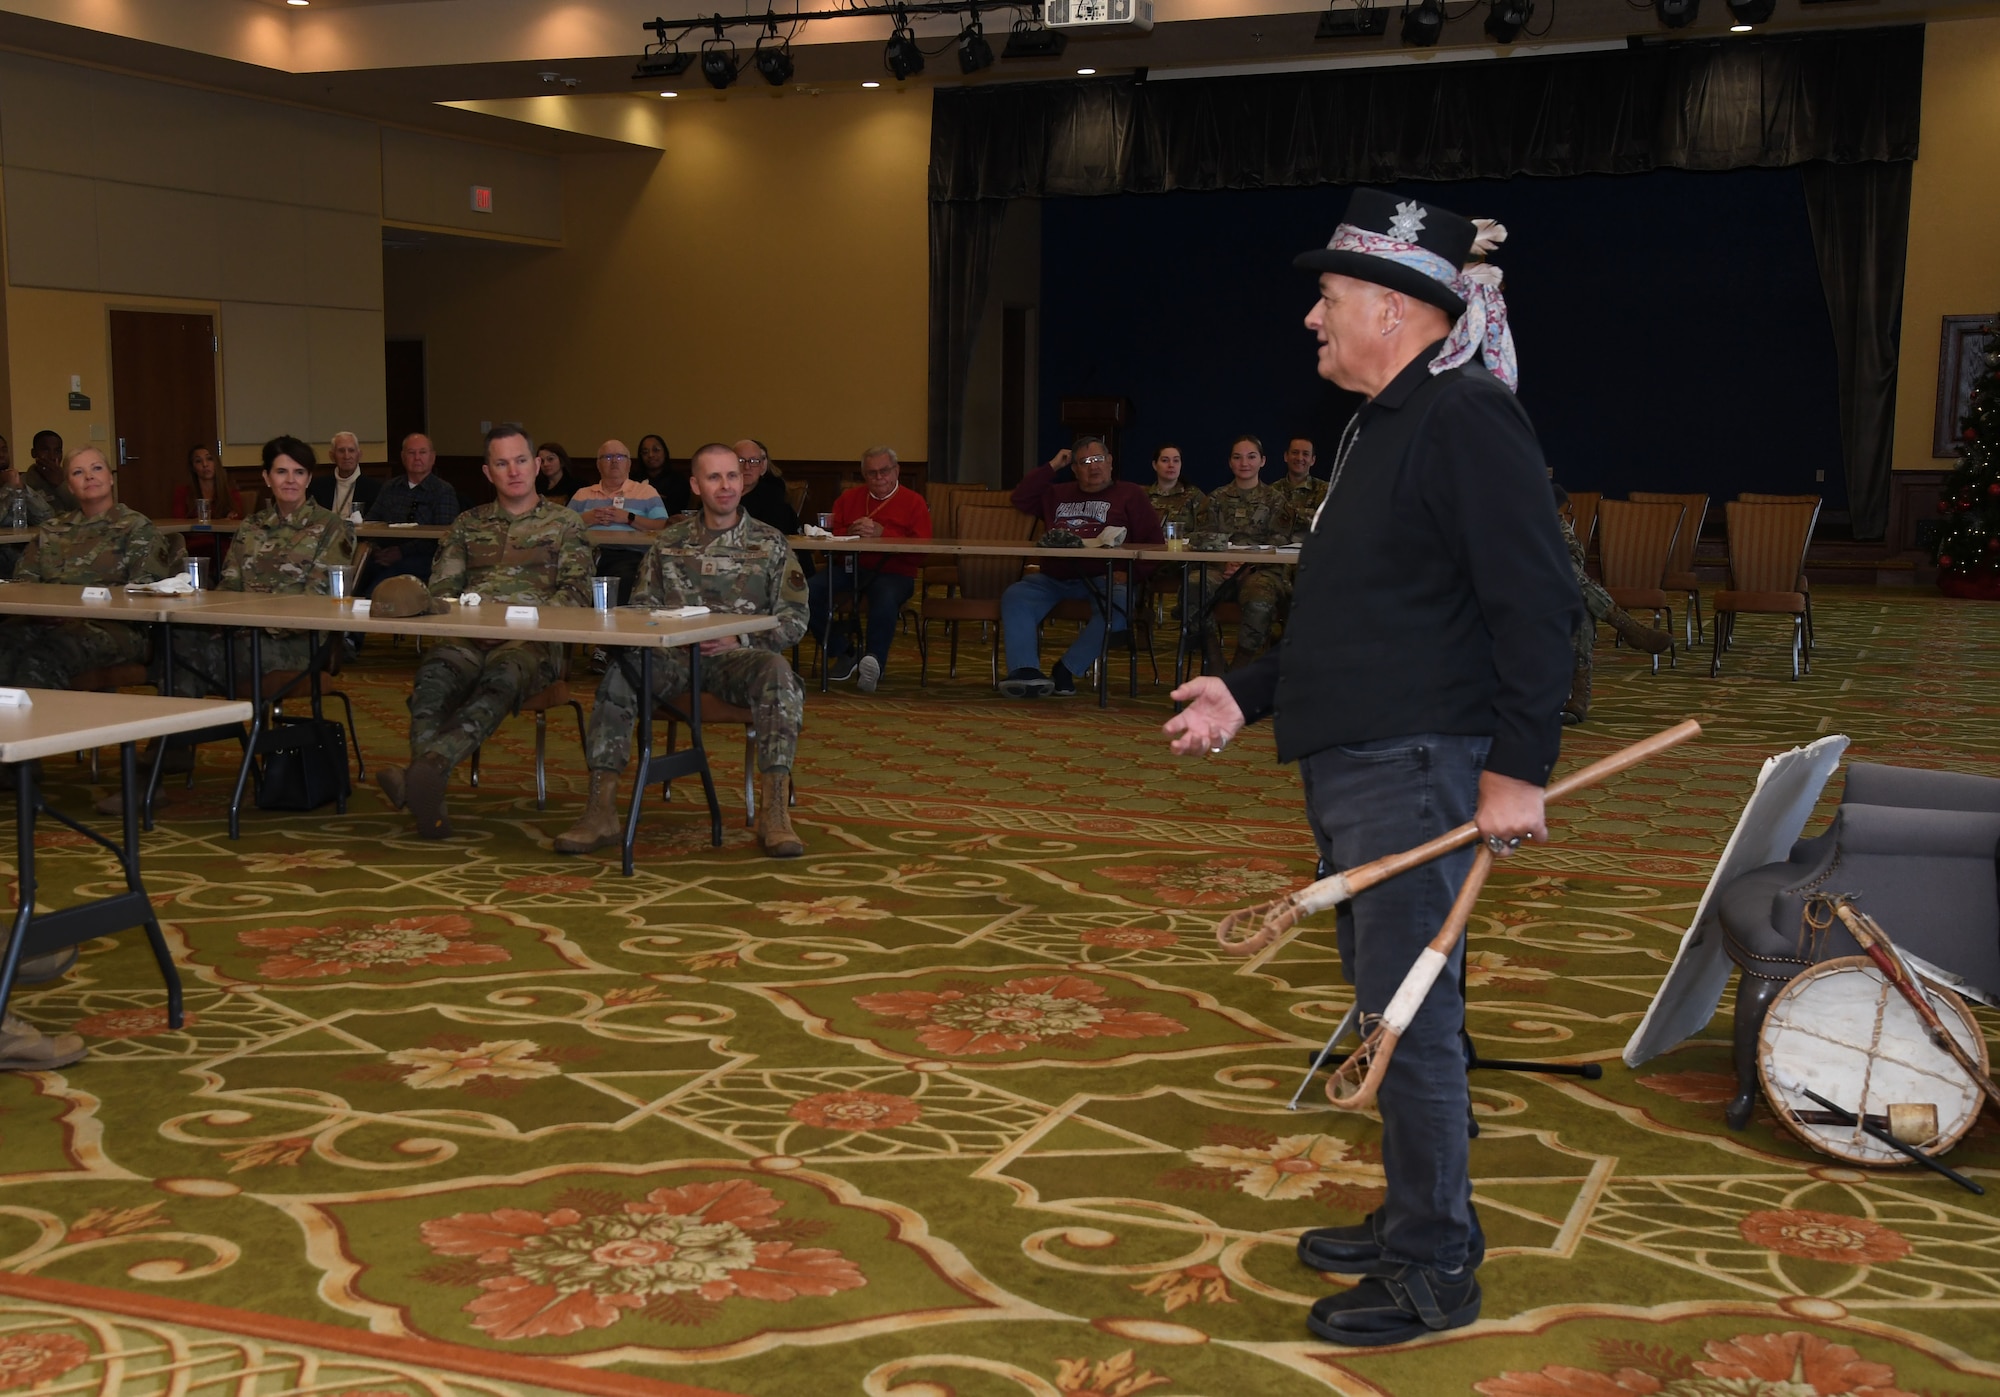 Grayhawk Perkins explains how stick ball is played to Keesler personnel inside the Bay Breeze Event Center at Keesler Air Force Base, Mississippi, Nov. 21, 2022.